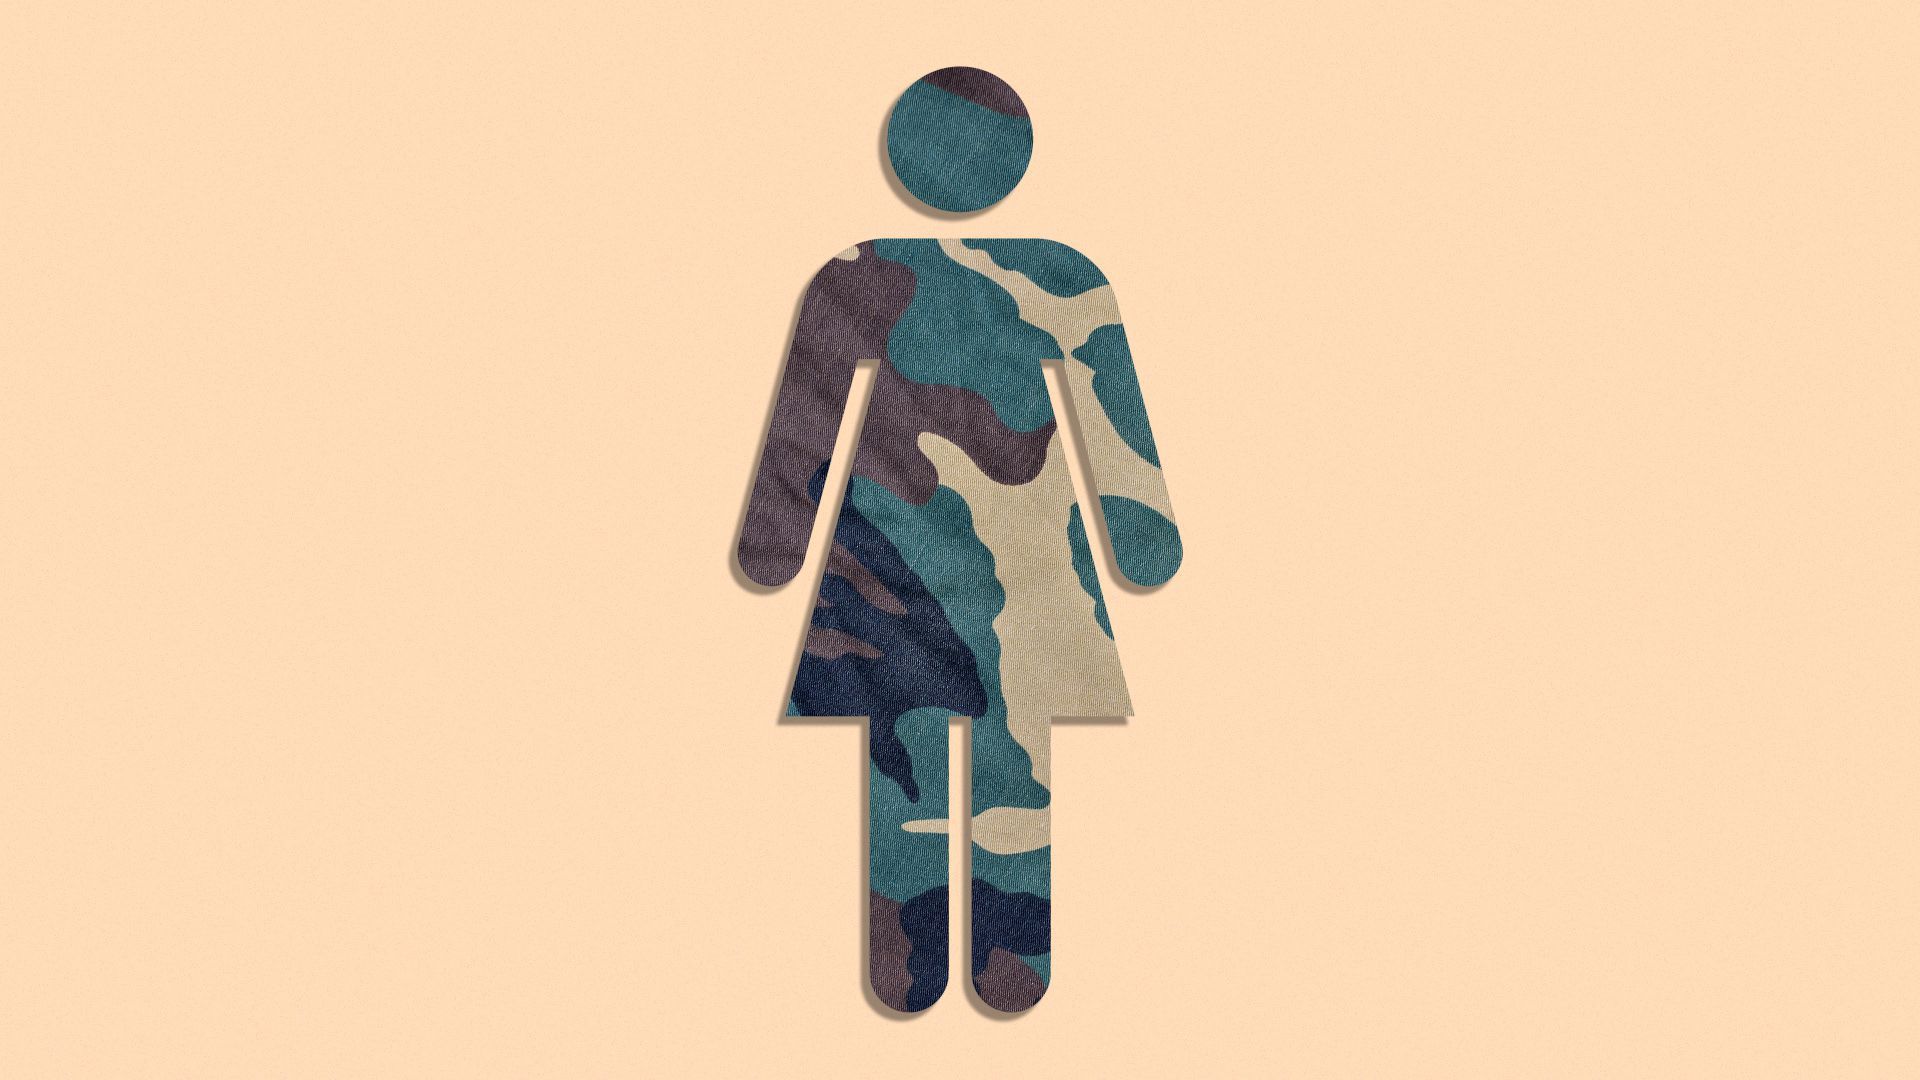 Illustration of a woman silhouette icon covered with camouflage.